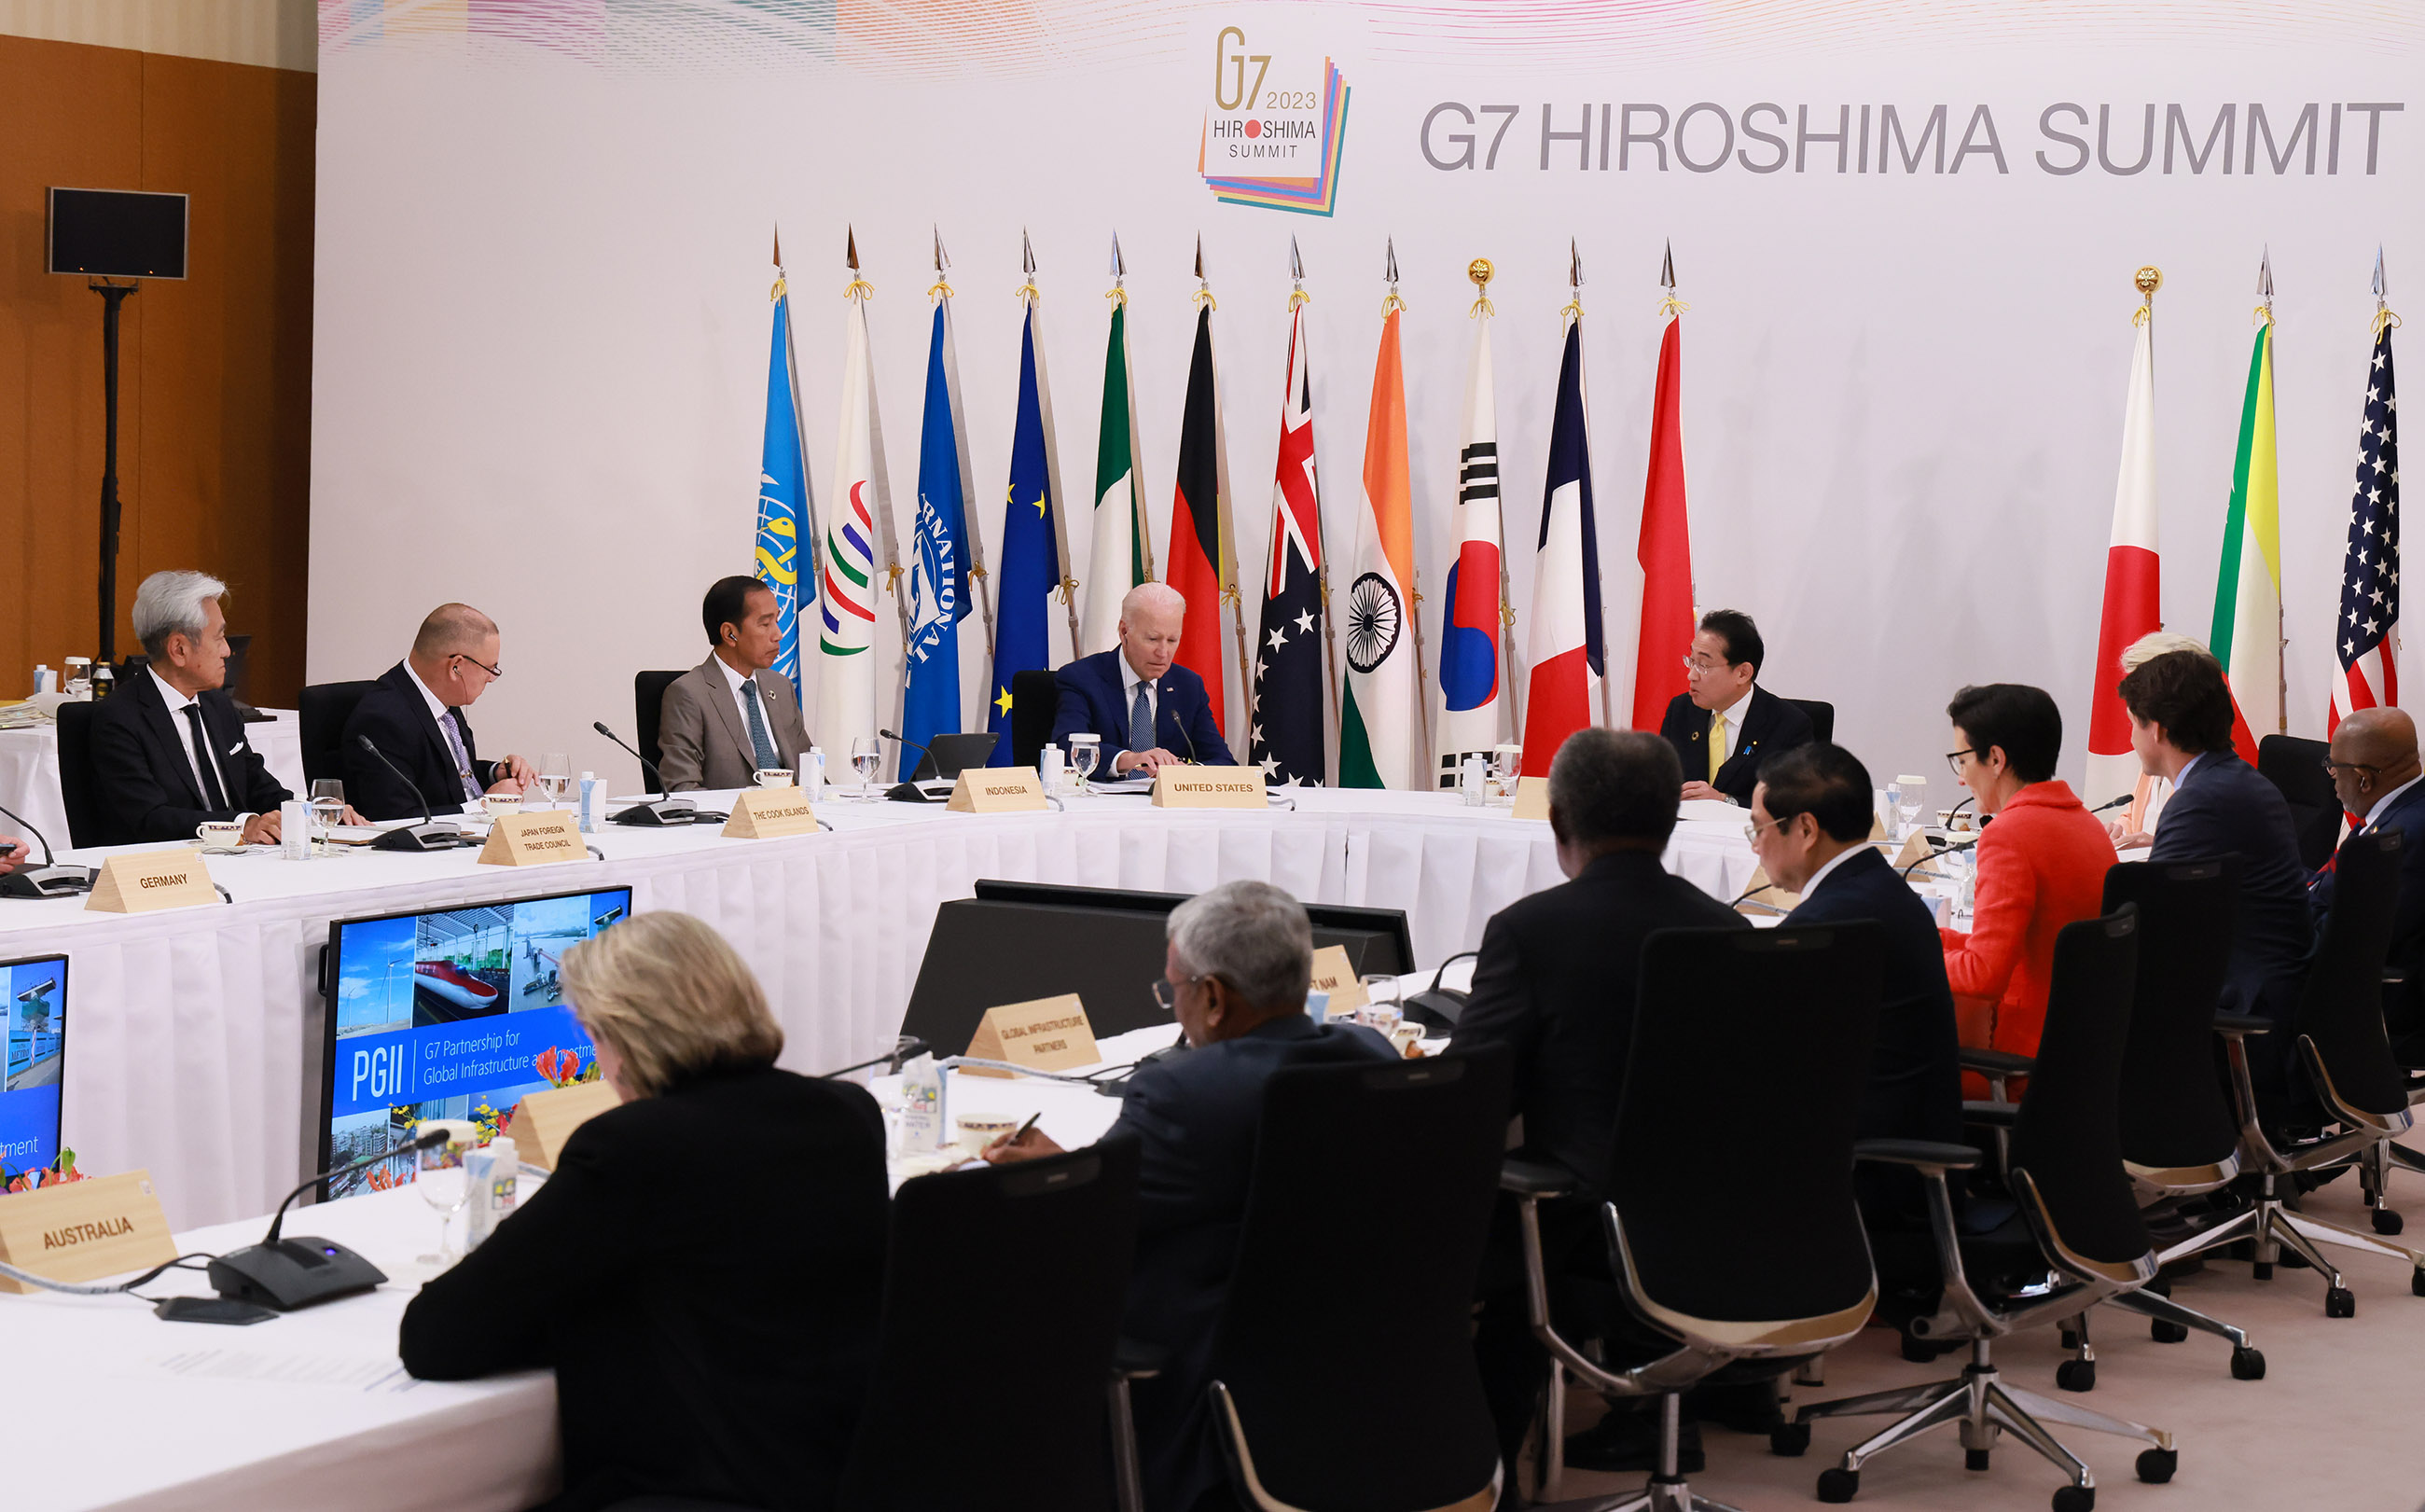 Prime Minister Kishida engaging in discussions at the side-event (2)